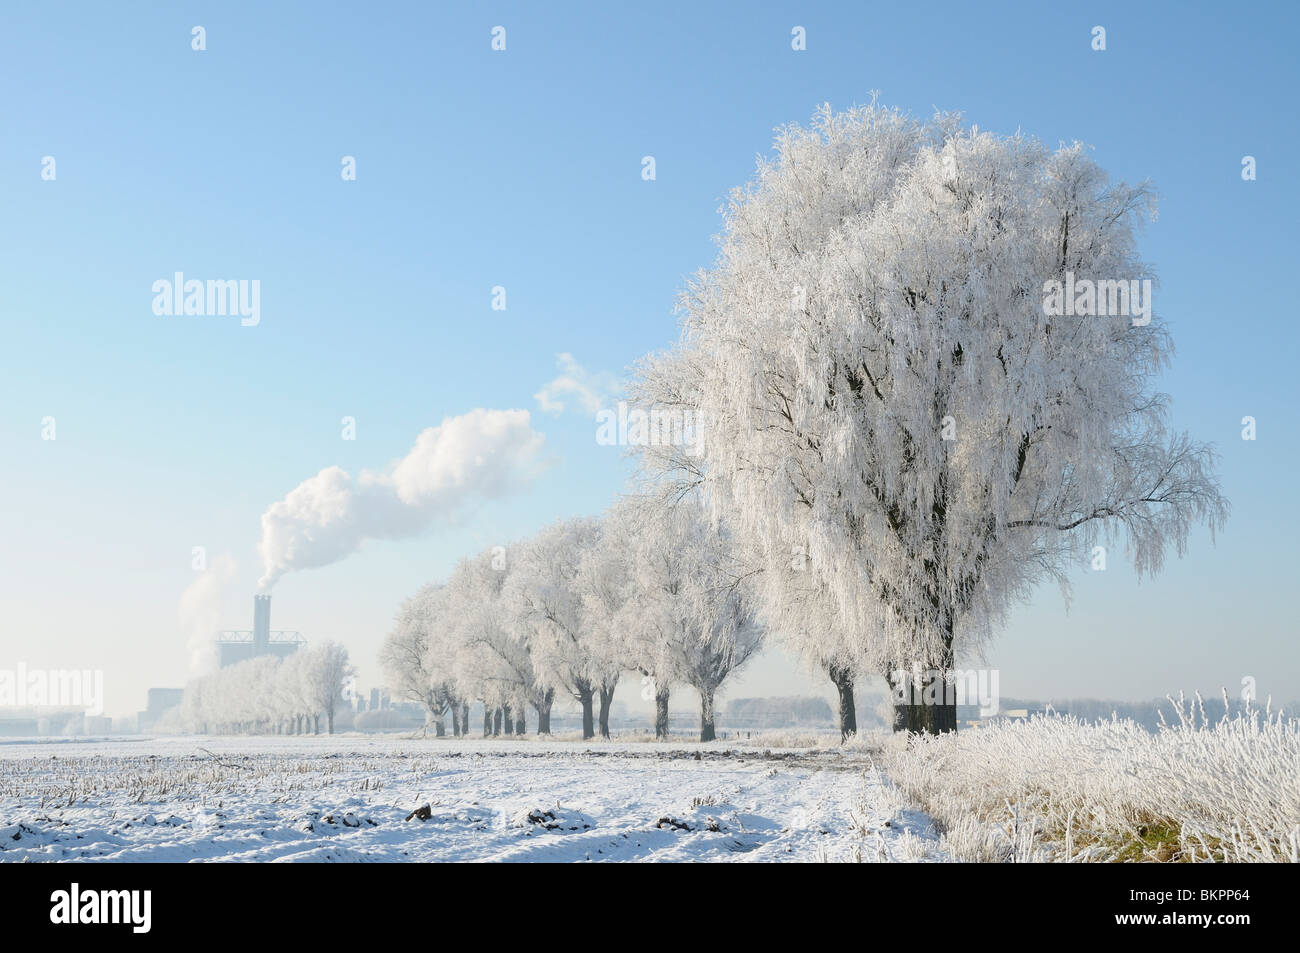 Winter landscape with a smoking chimney and hoar frosted trees Stock Photo